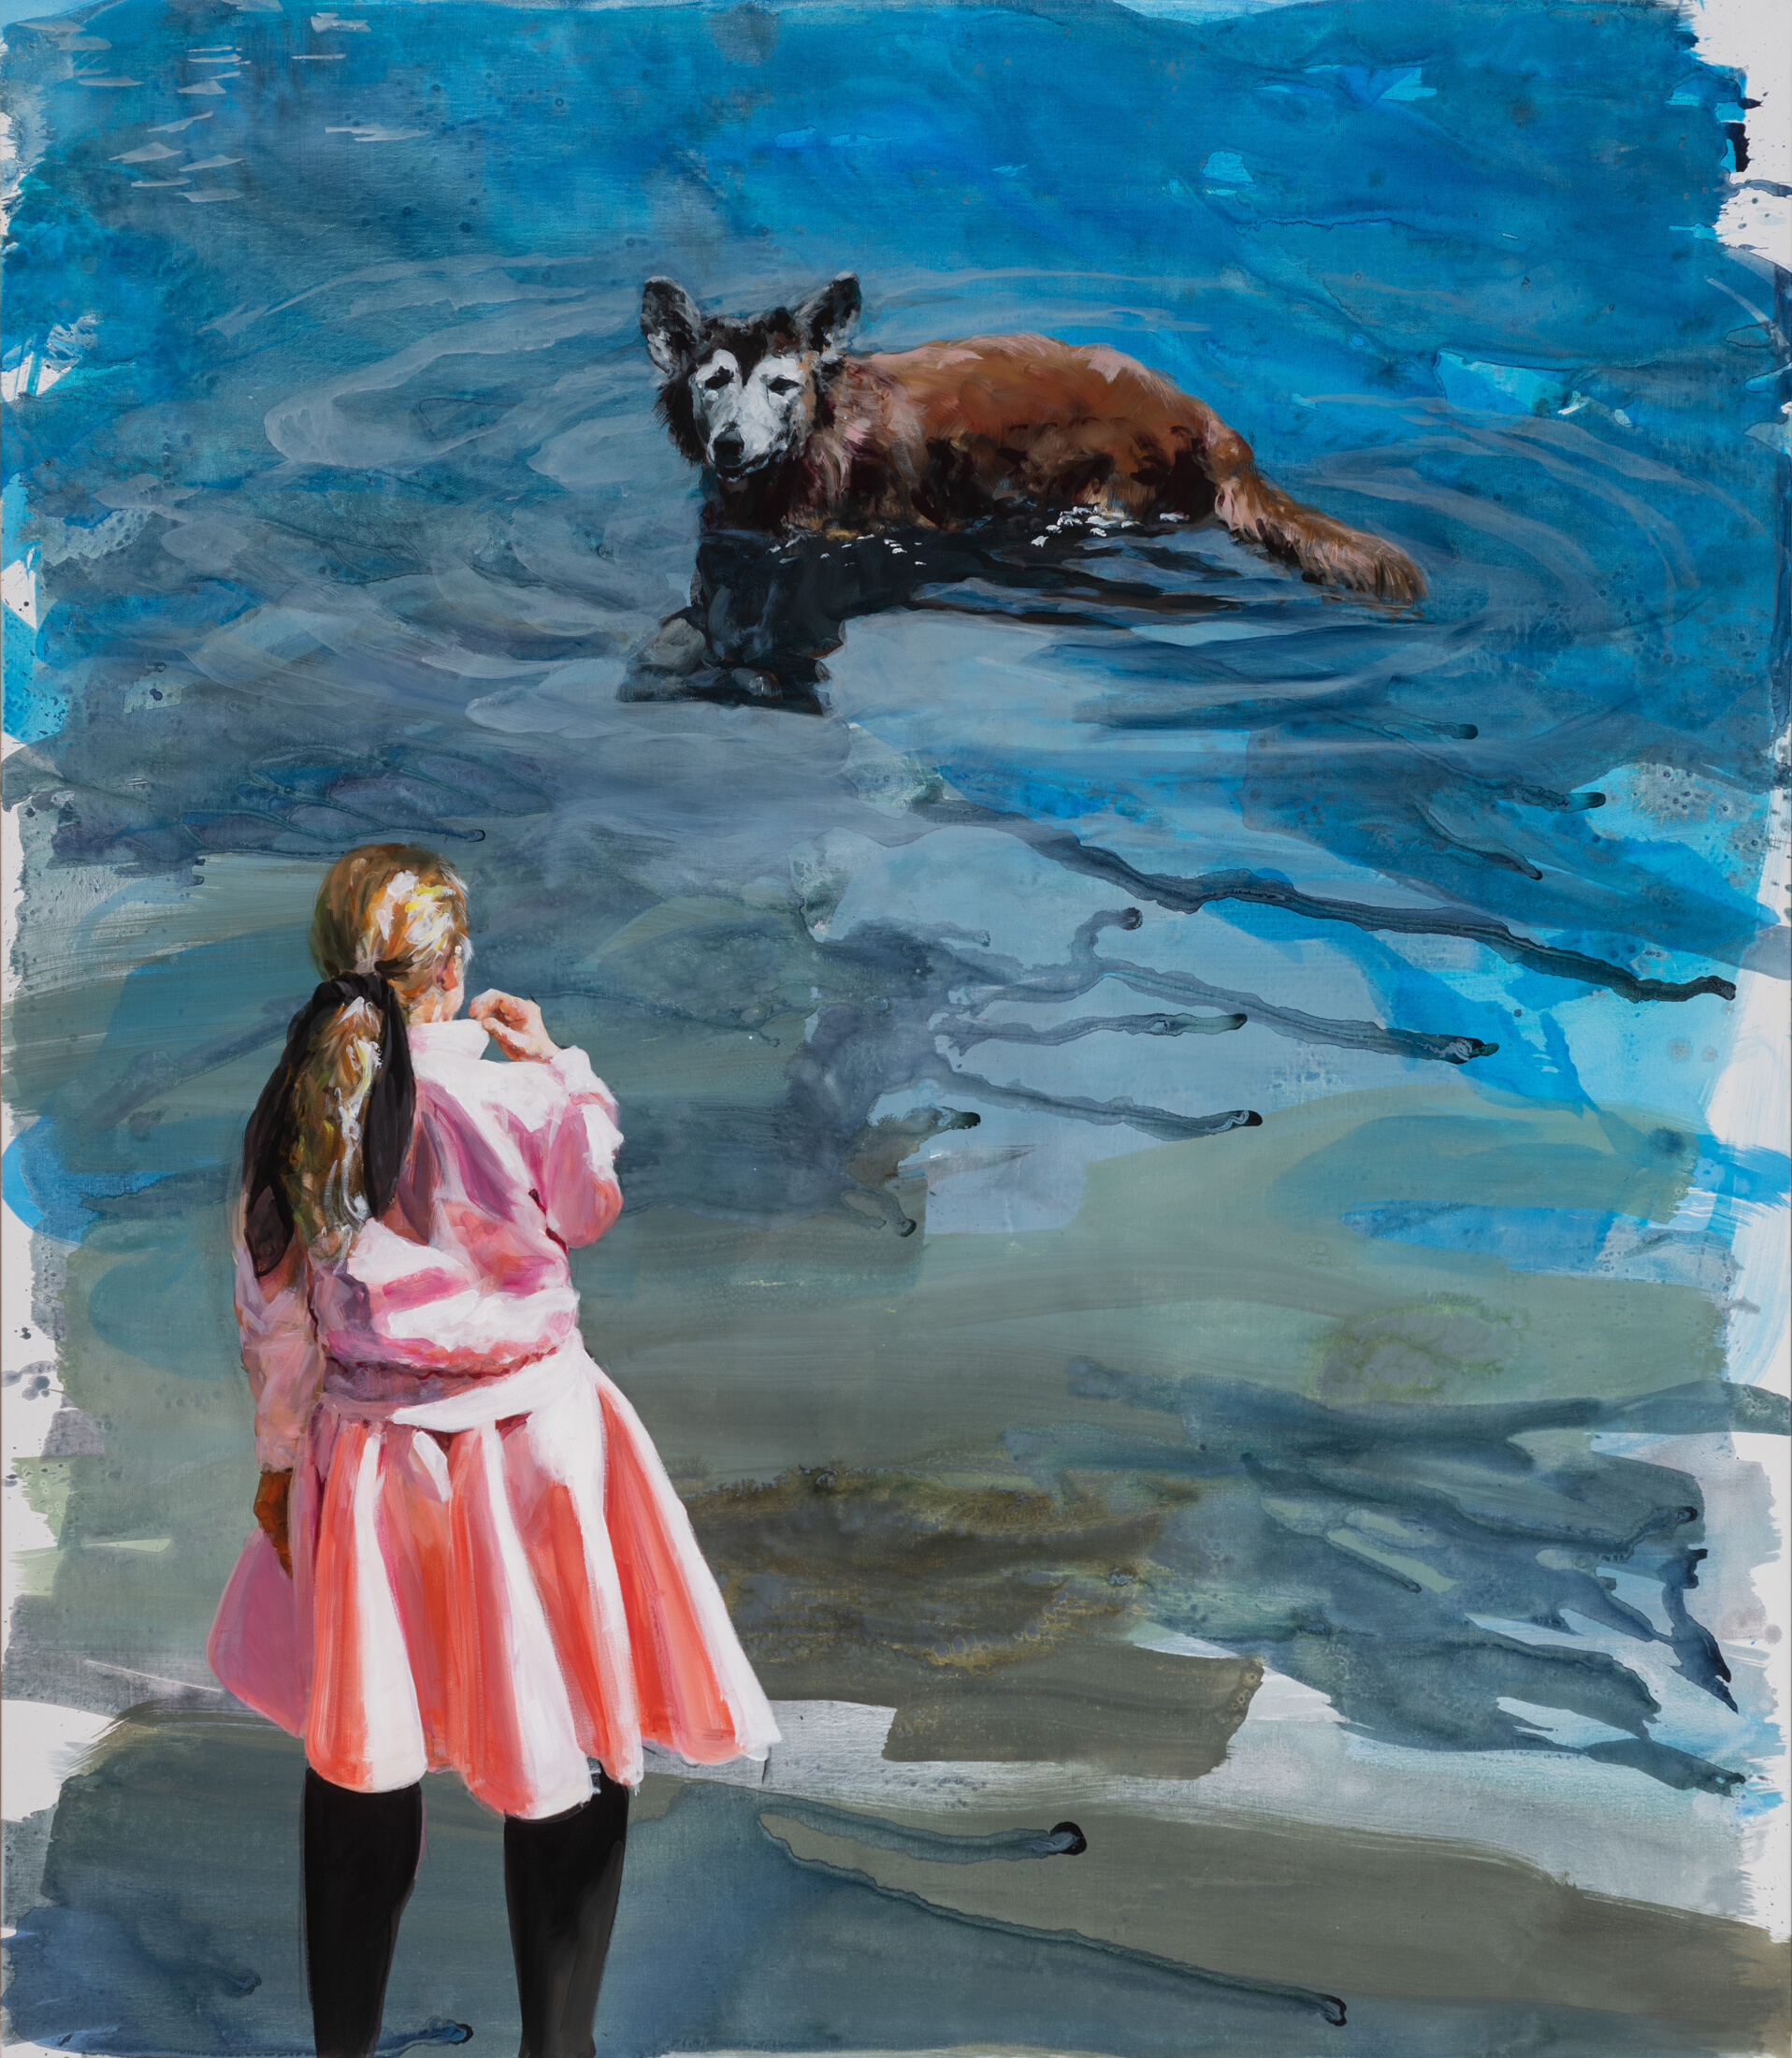 Eric Fischl "Old Dog" 2022, acrylic on linen, 75 x 65 inches, 190.5 x 165.1 cm